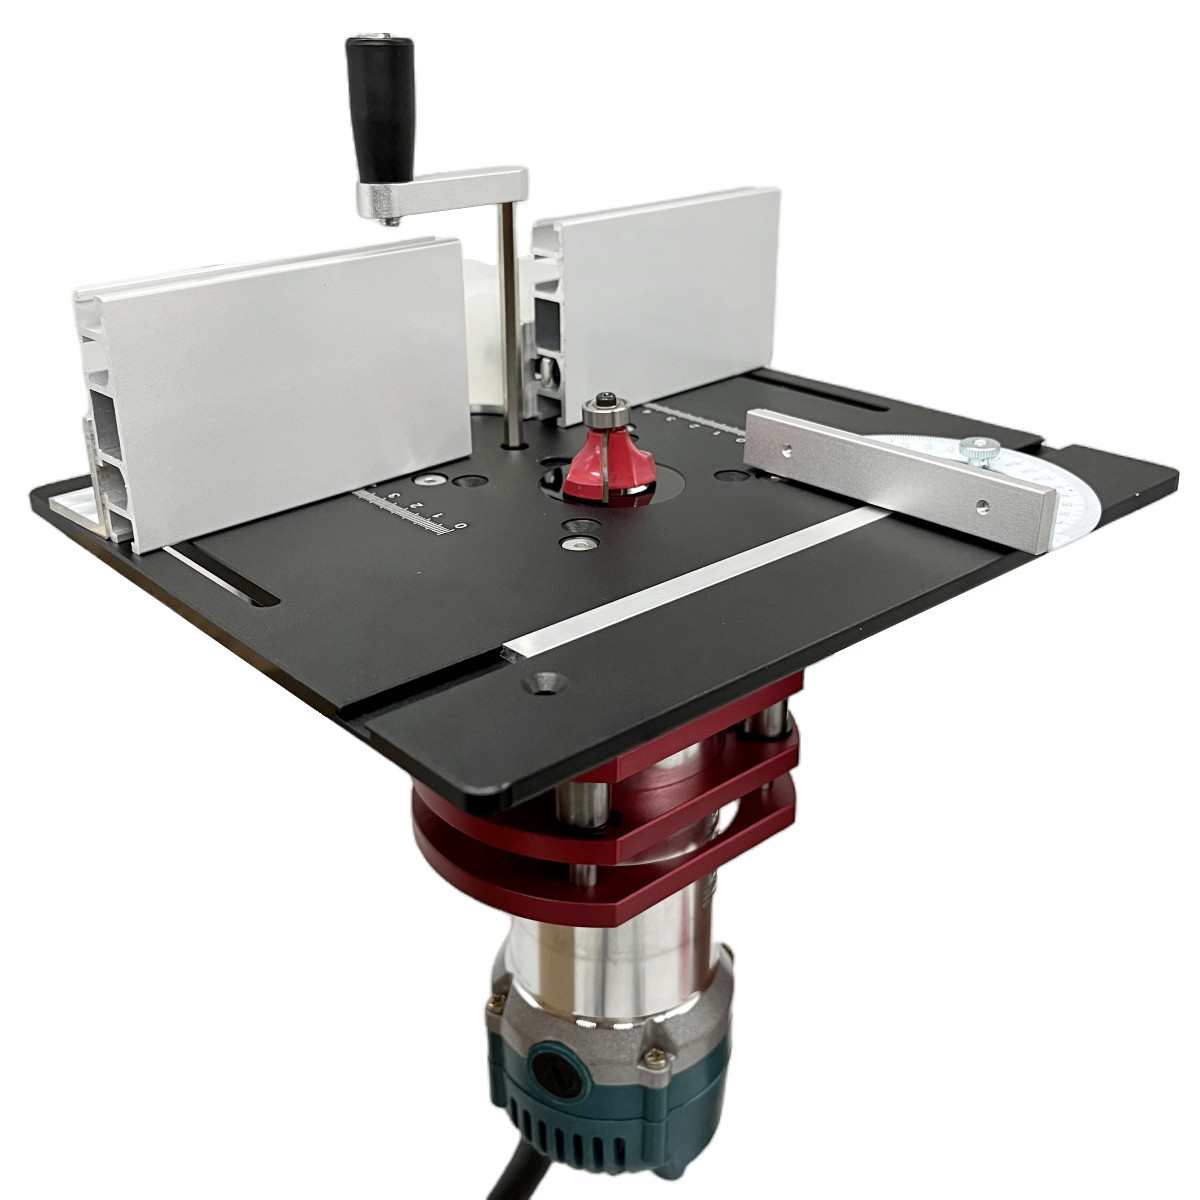 

Upgrade Your Woodworking With A Router And Aluminum Router Plate For 65mm Motors!